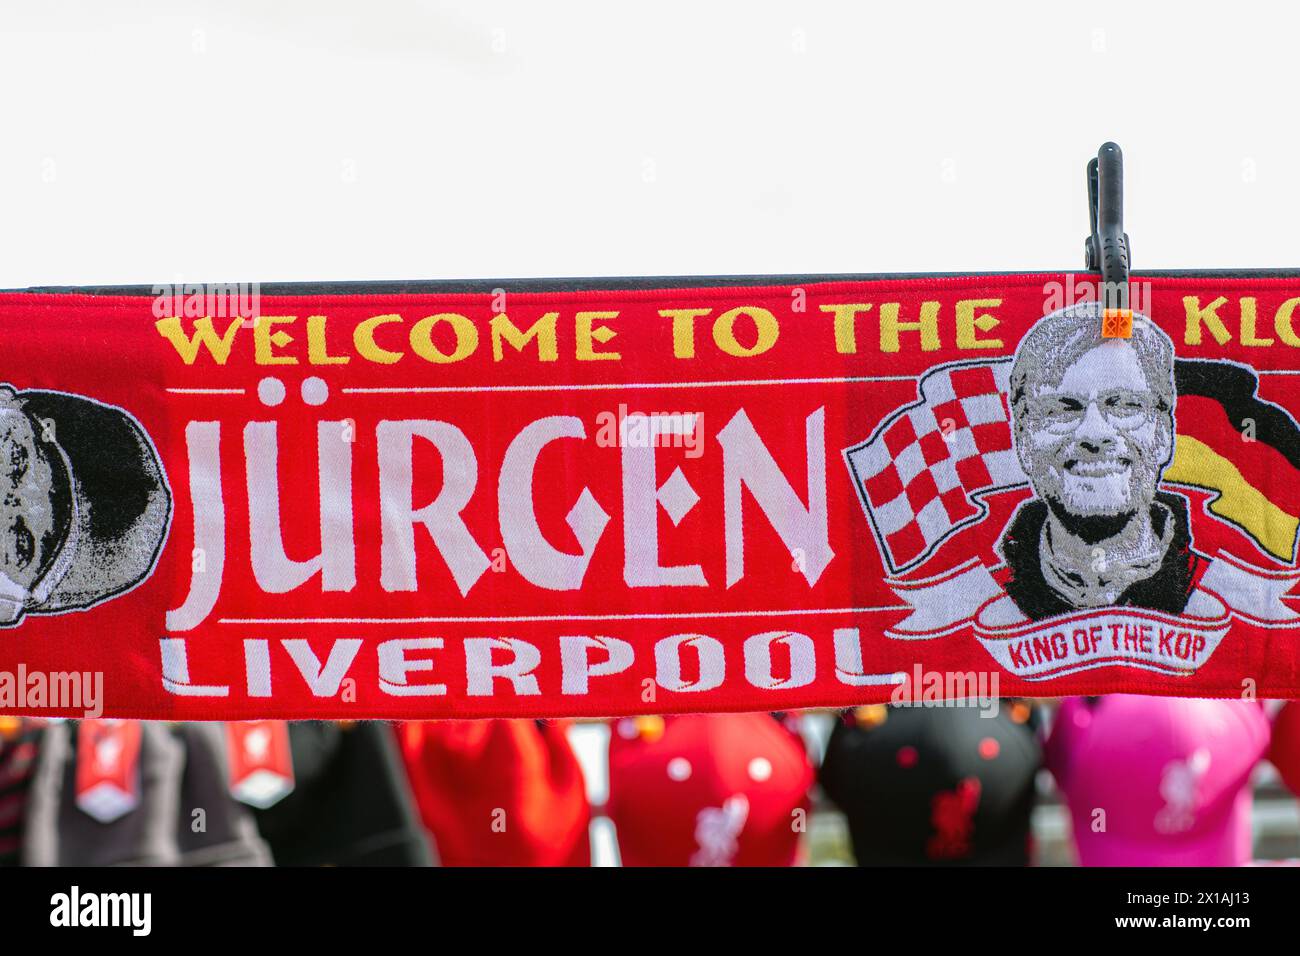 Jurgen Klopp scarf  for sale before the Premier League match Crystal Palace vs Liverpool . Stock Photo